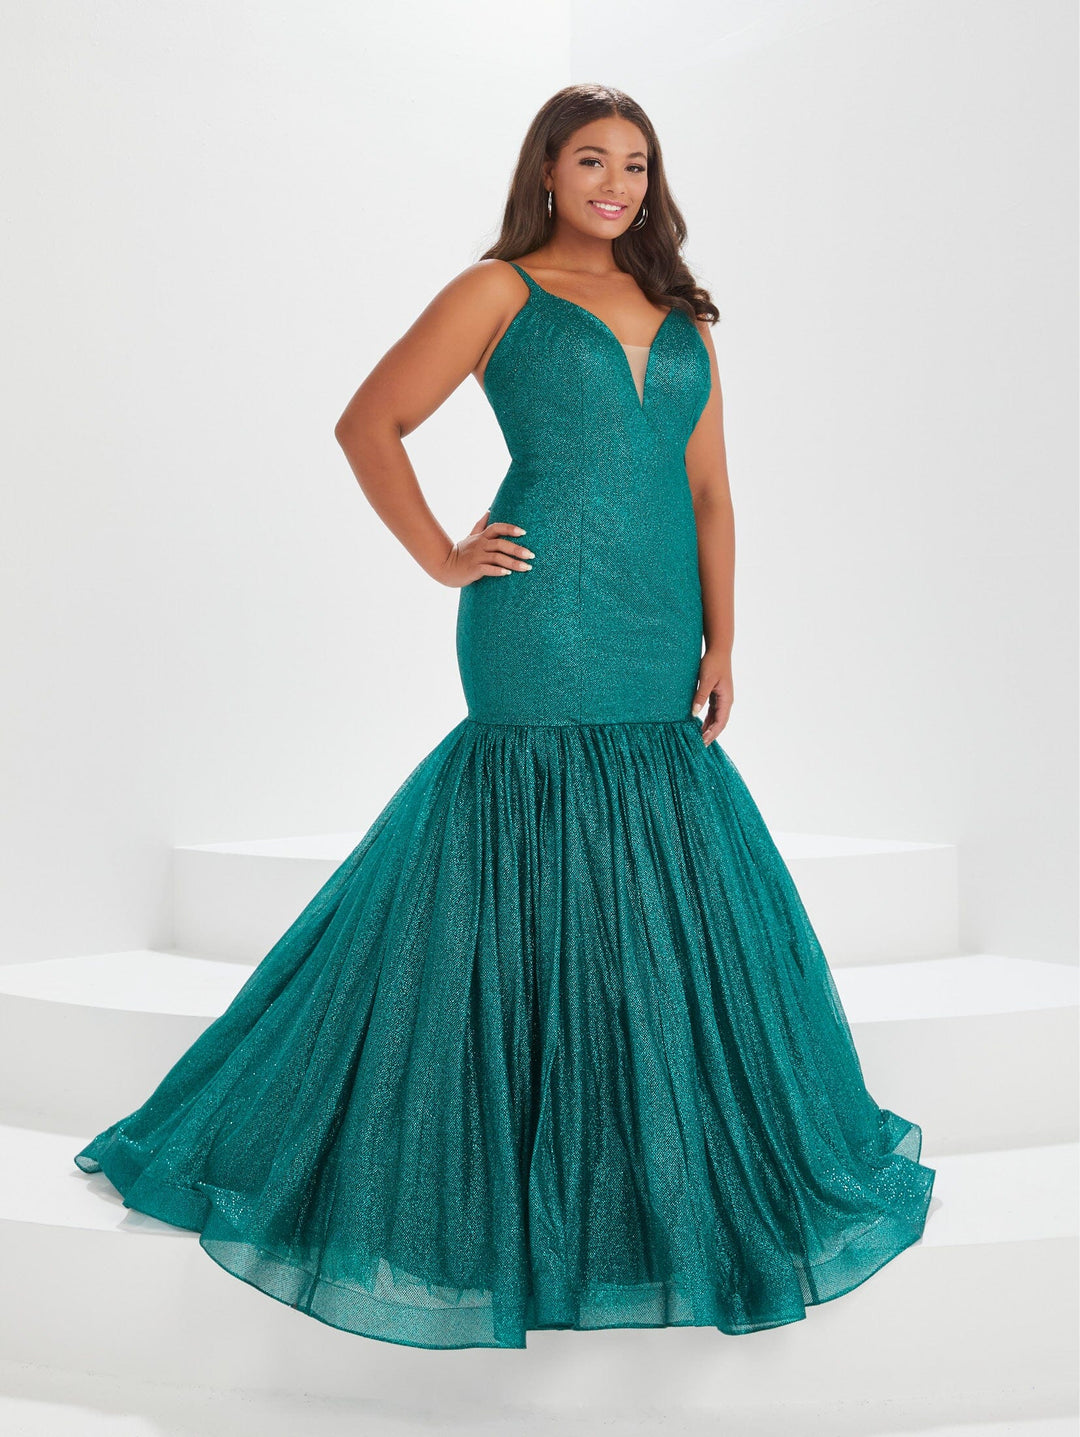 Plus Size Glitter V-Neck Mermaid Gown by Tiffany Designs 16047